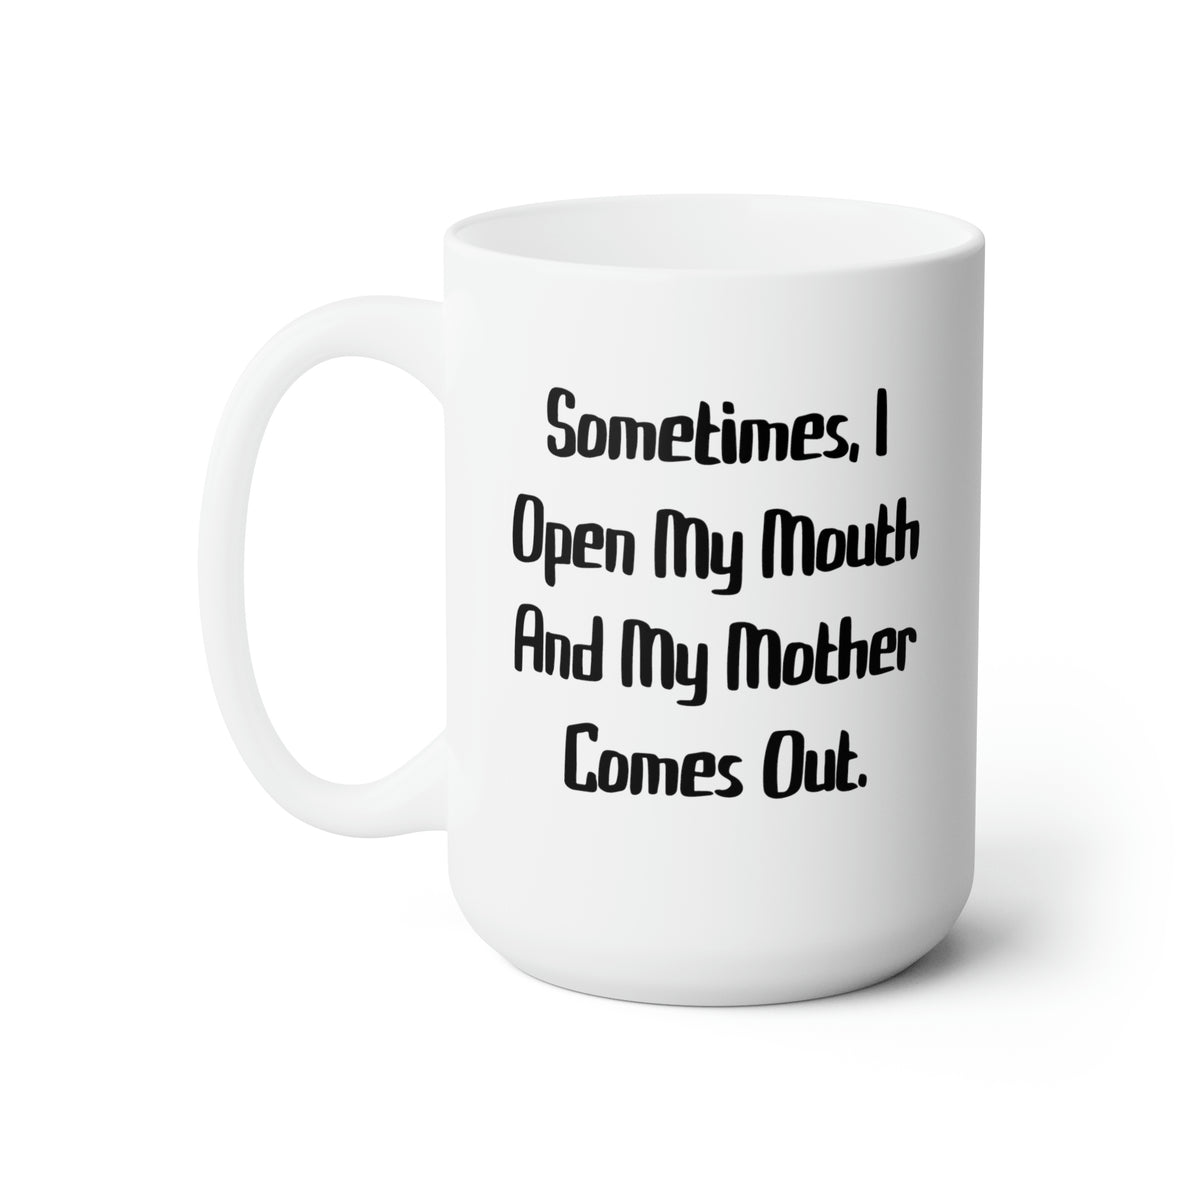 Sometimes, I Open My Mouth And My Mother Comes Out. Mother 15oz Mug, Cute Mother, Cup For Mom